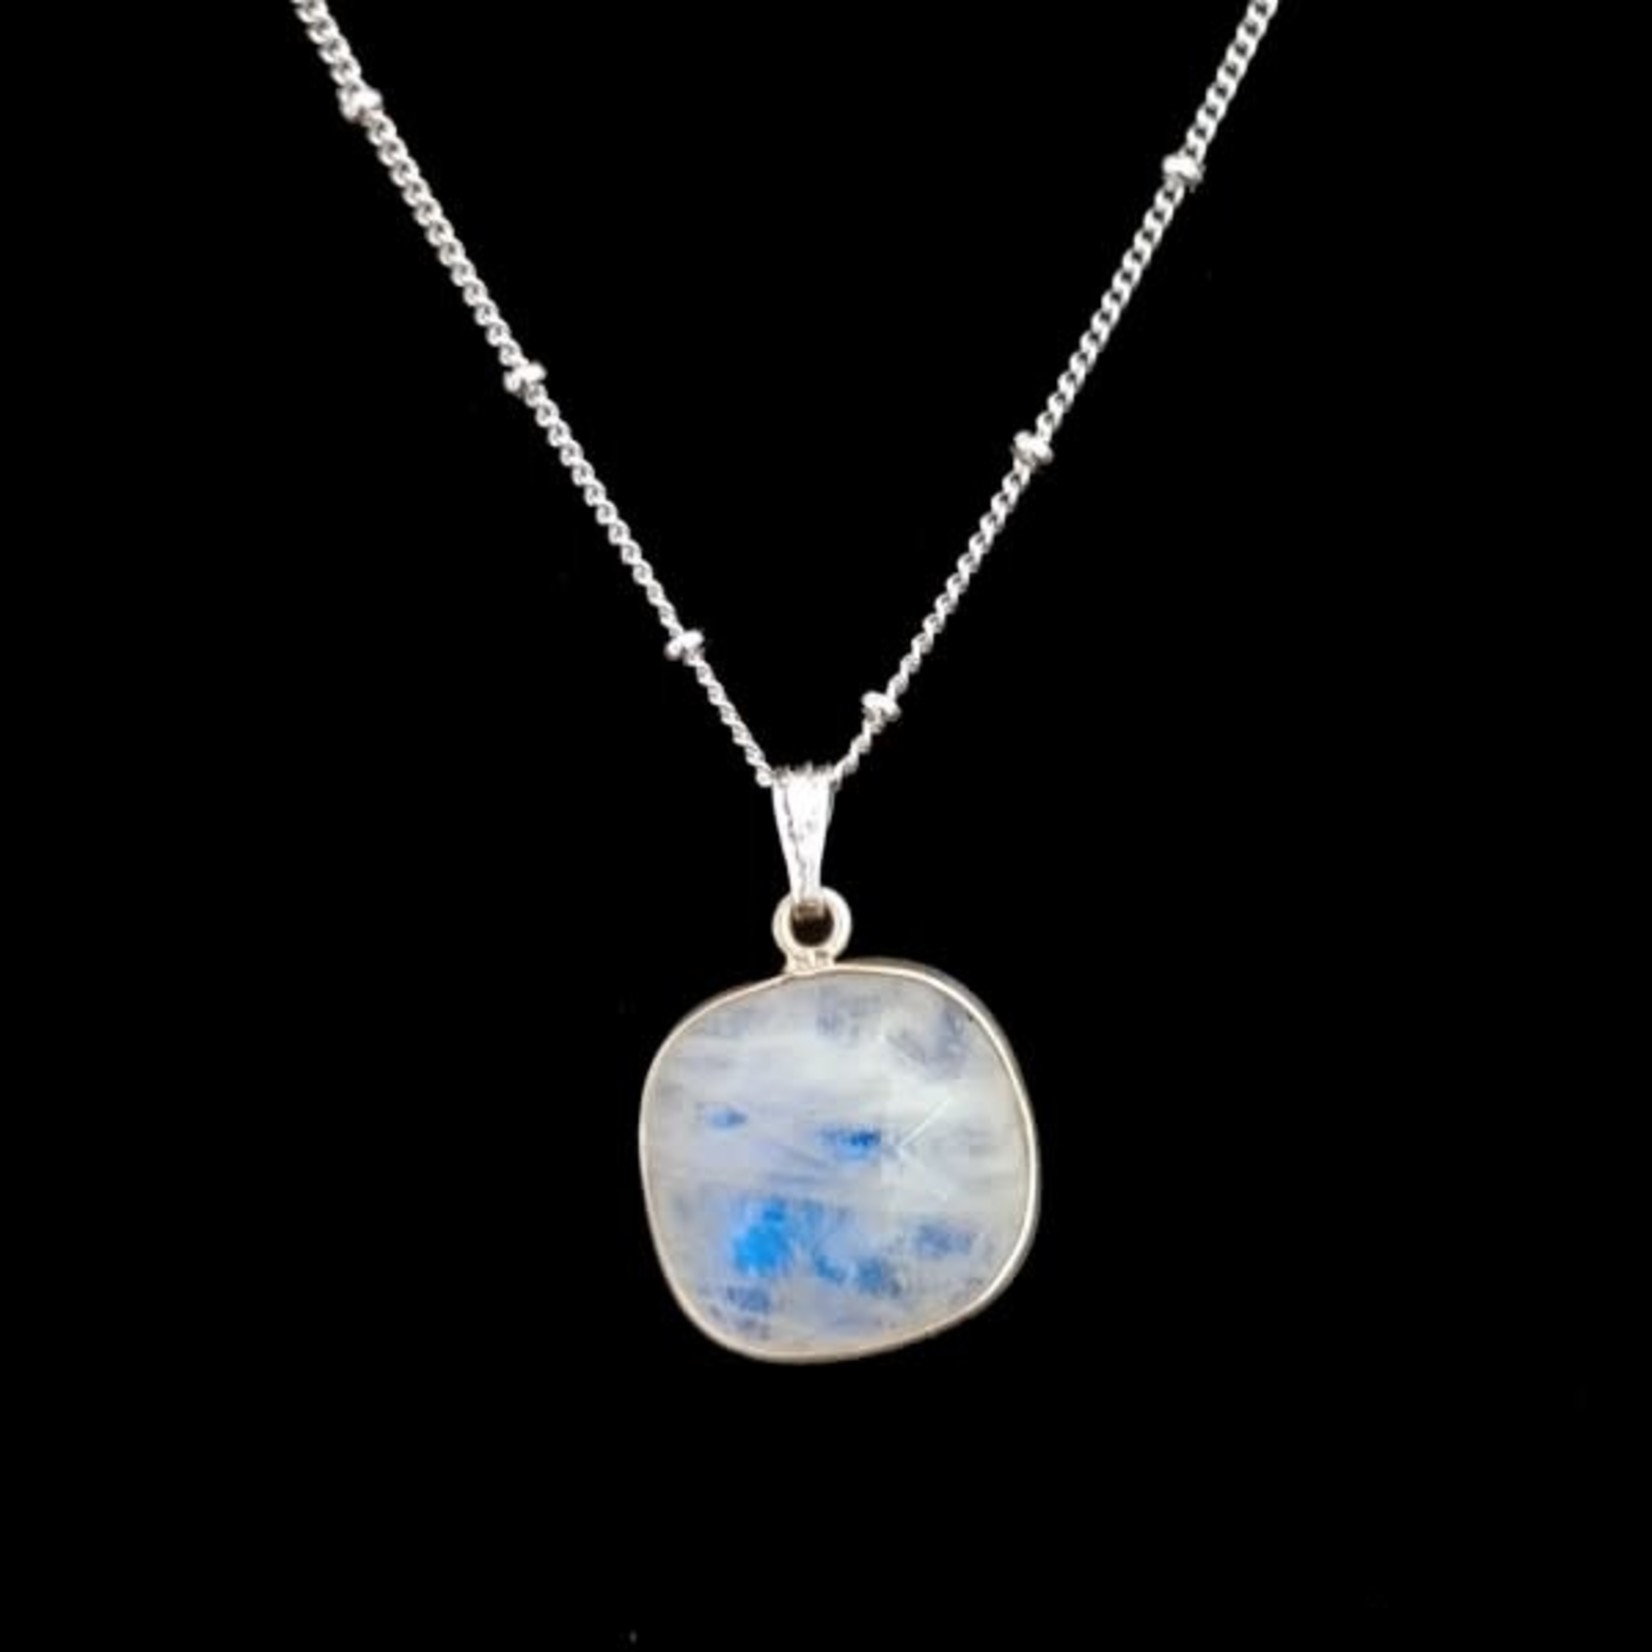 Rainbow Moonstone Pendant on Sterling Silver Necklace Chain